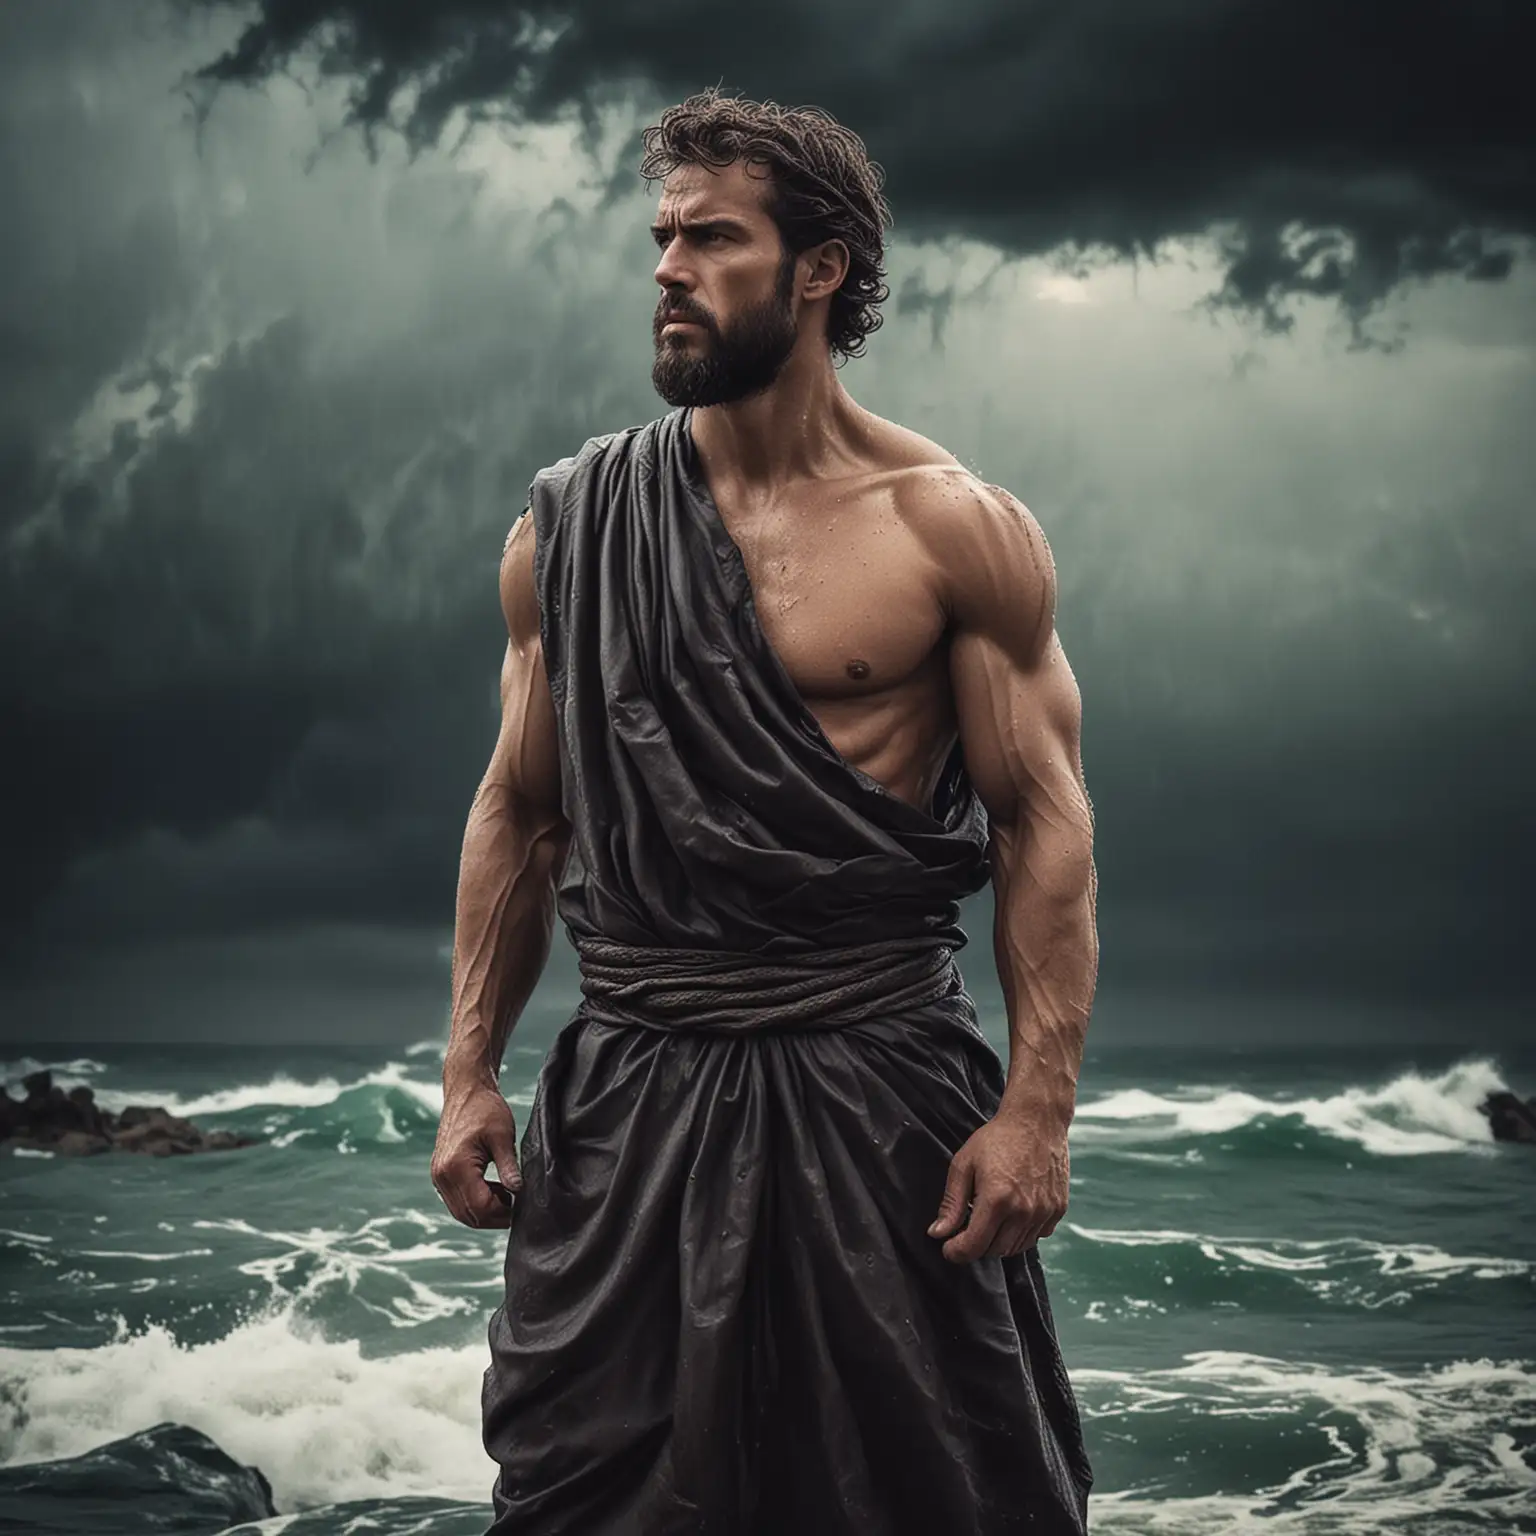 Stoic Philosopher Standing Strong in Storm Symbol of Resilience